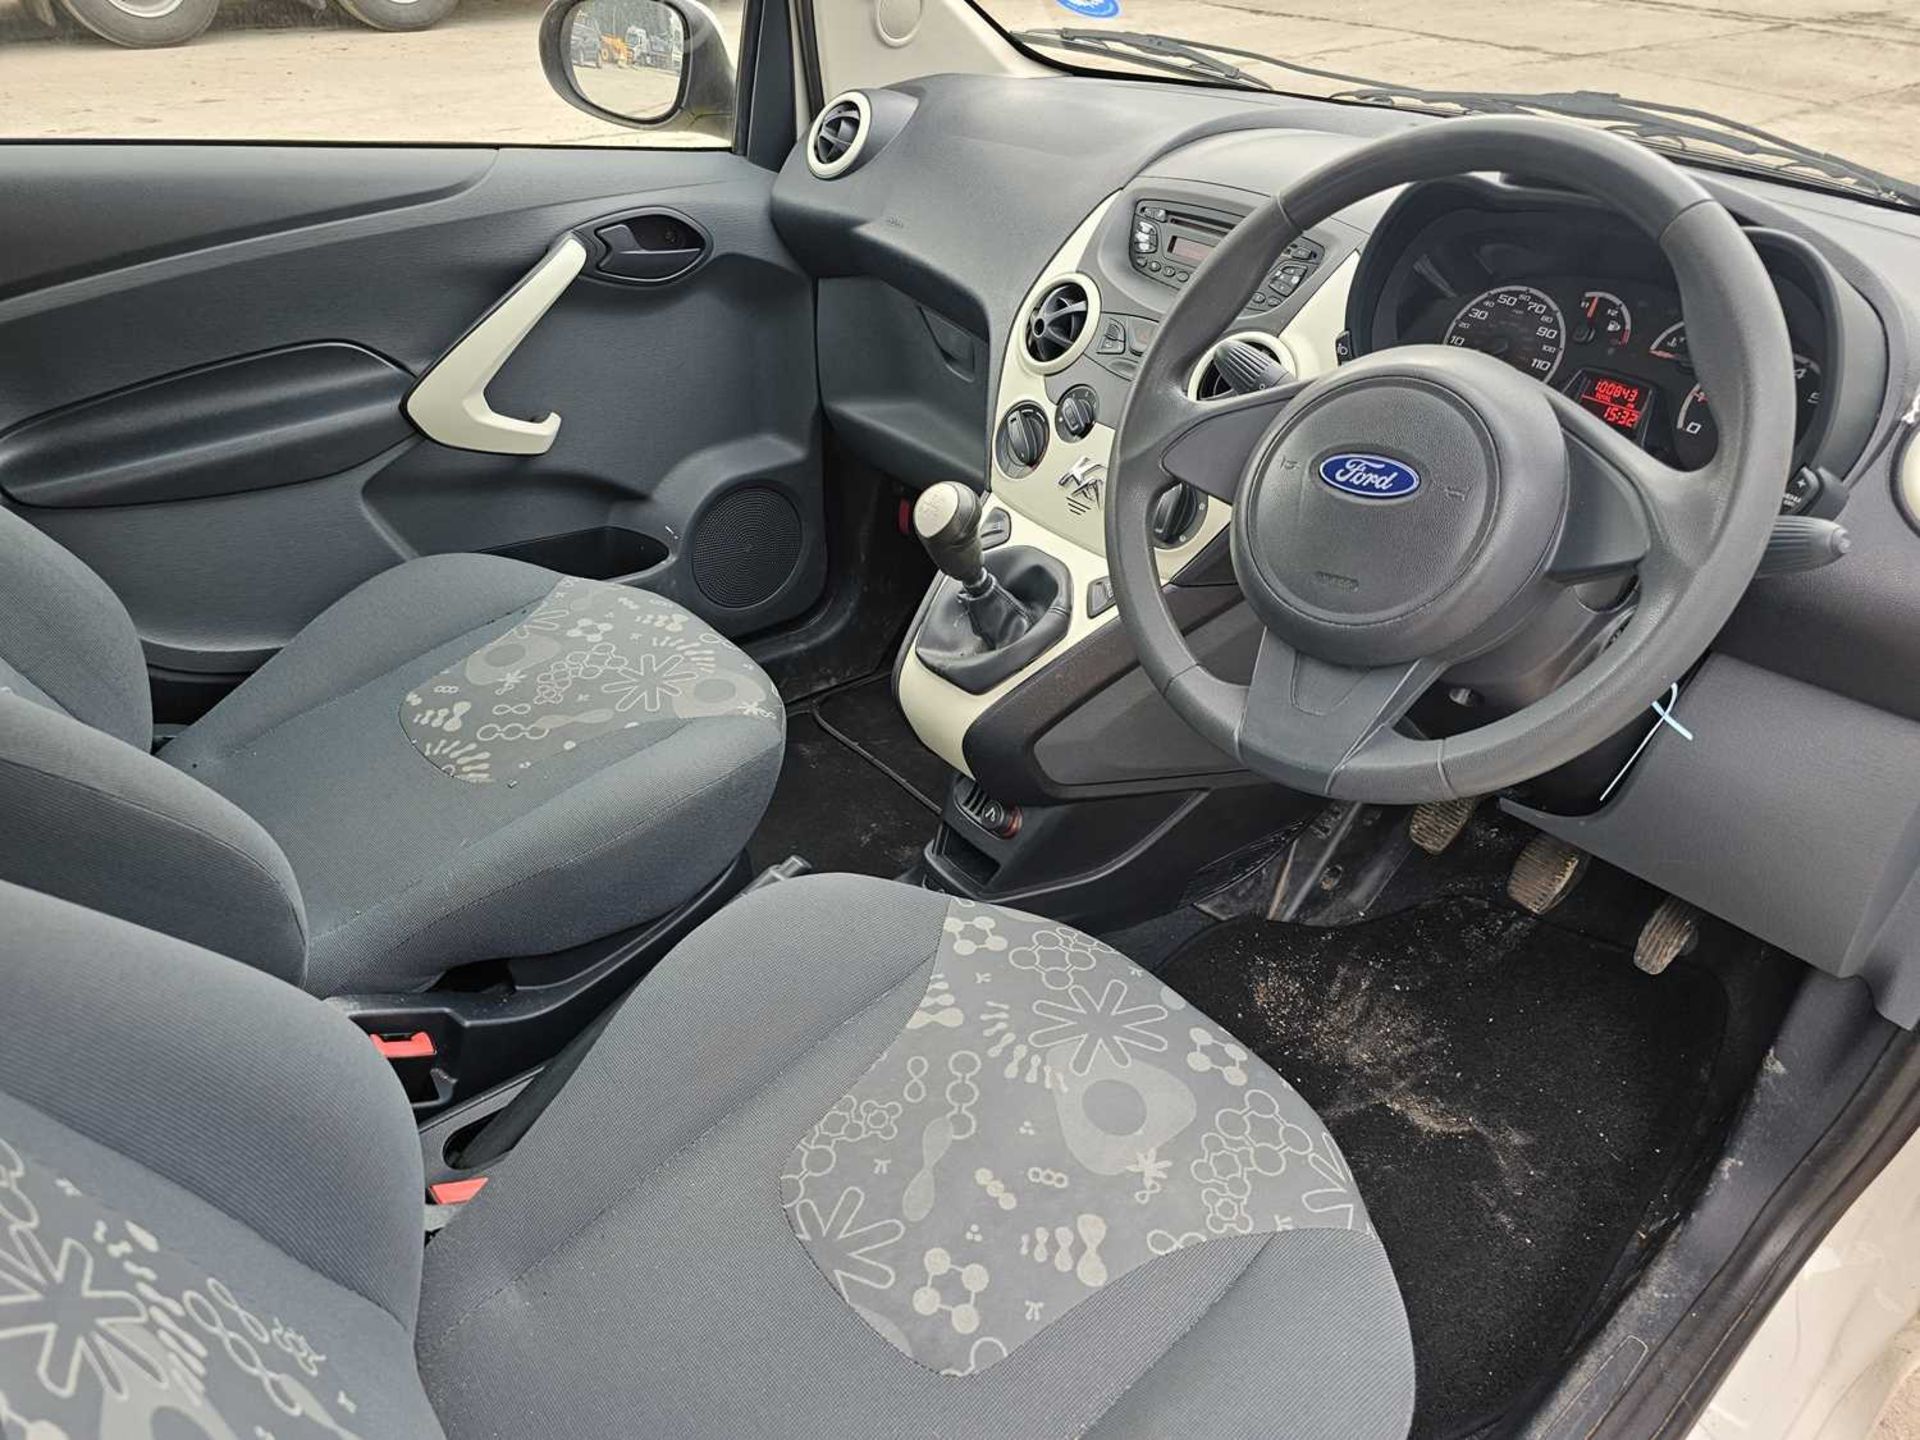 2010 Ford KA Edge, 5 Speed, A/C (Reg. Docs. & Service History Available) - Image 19 of 25